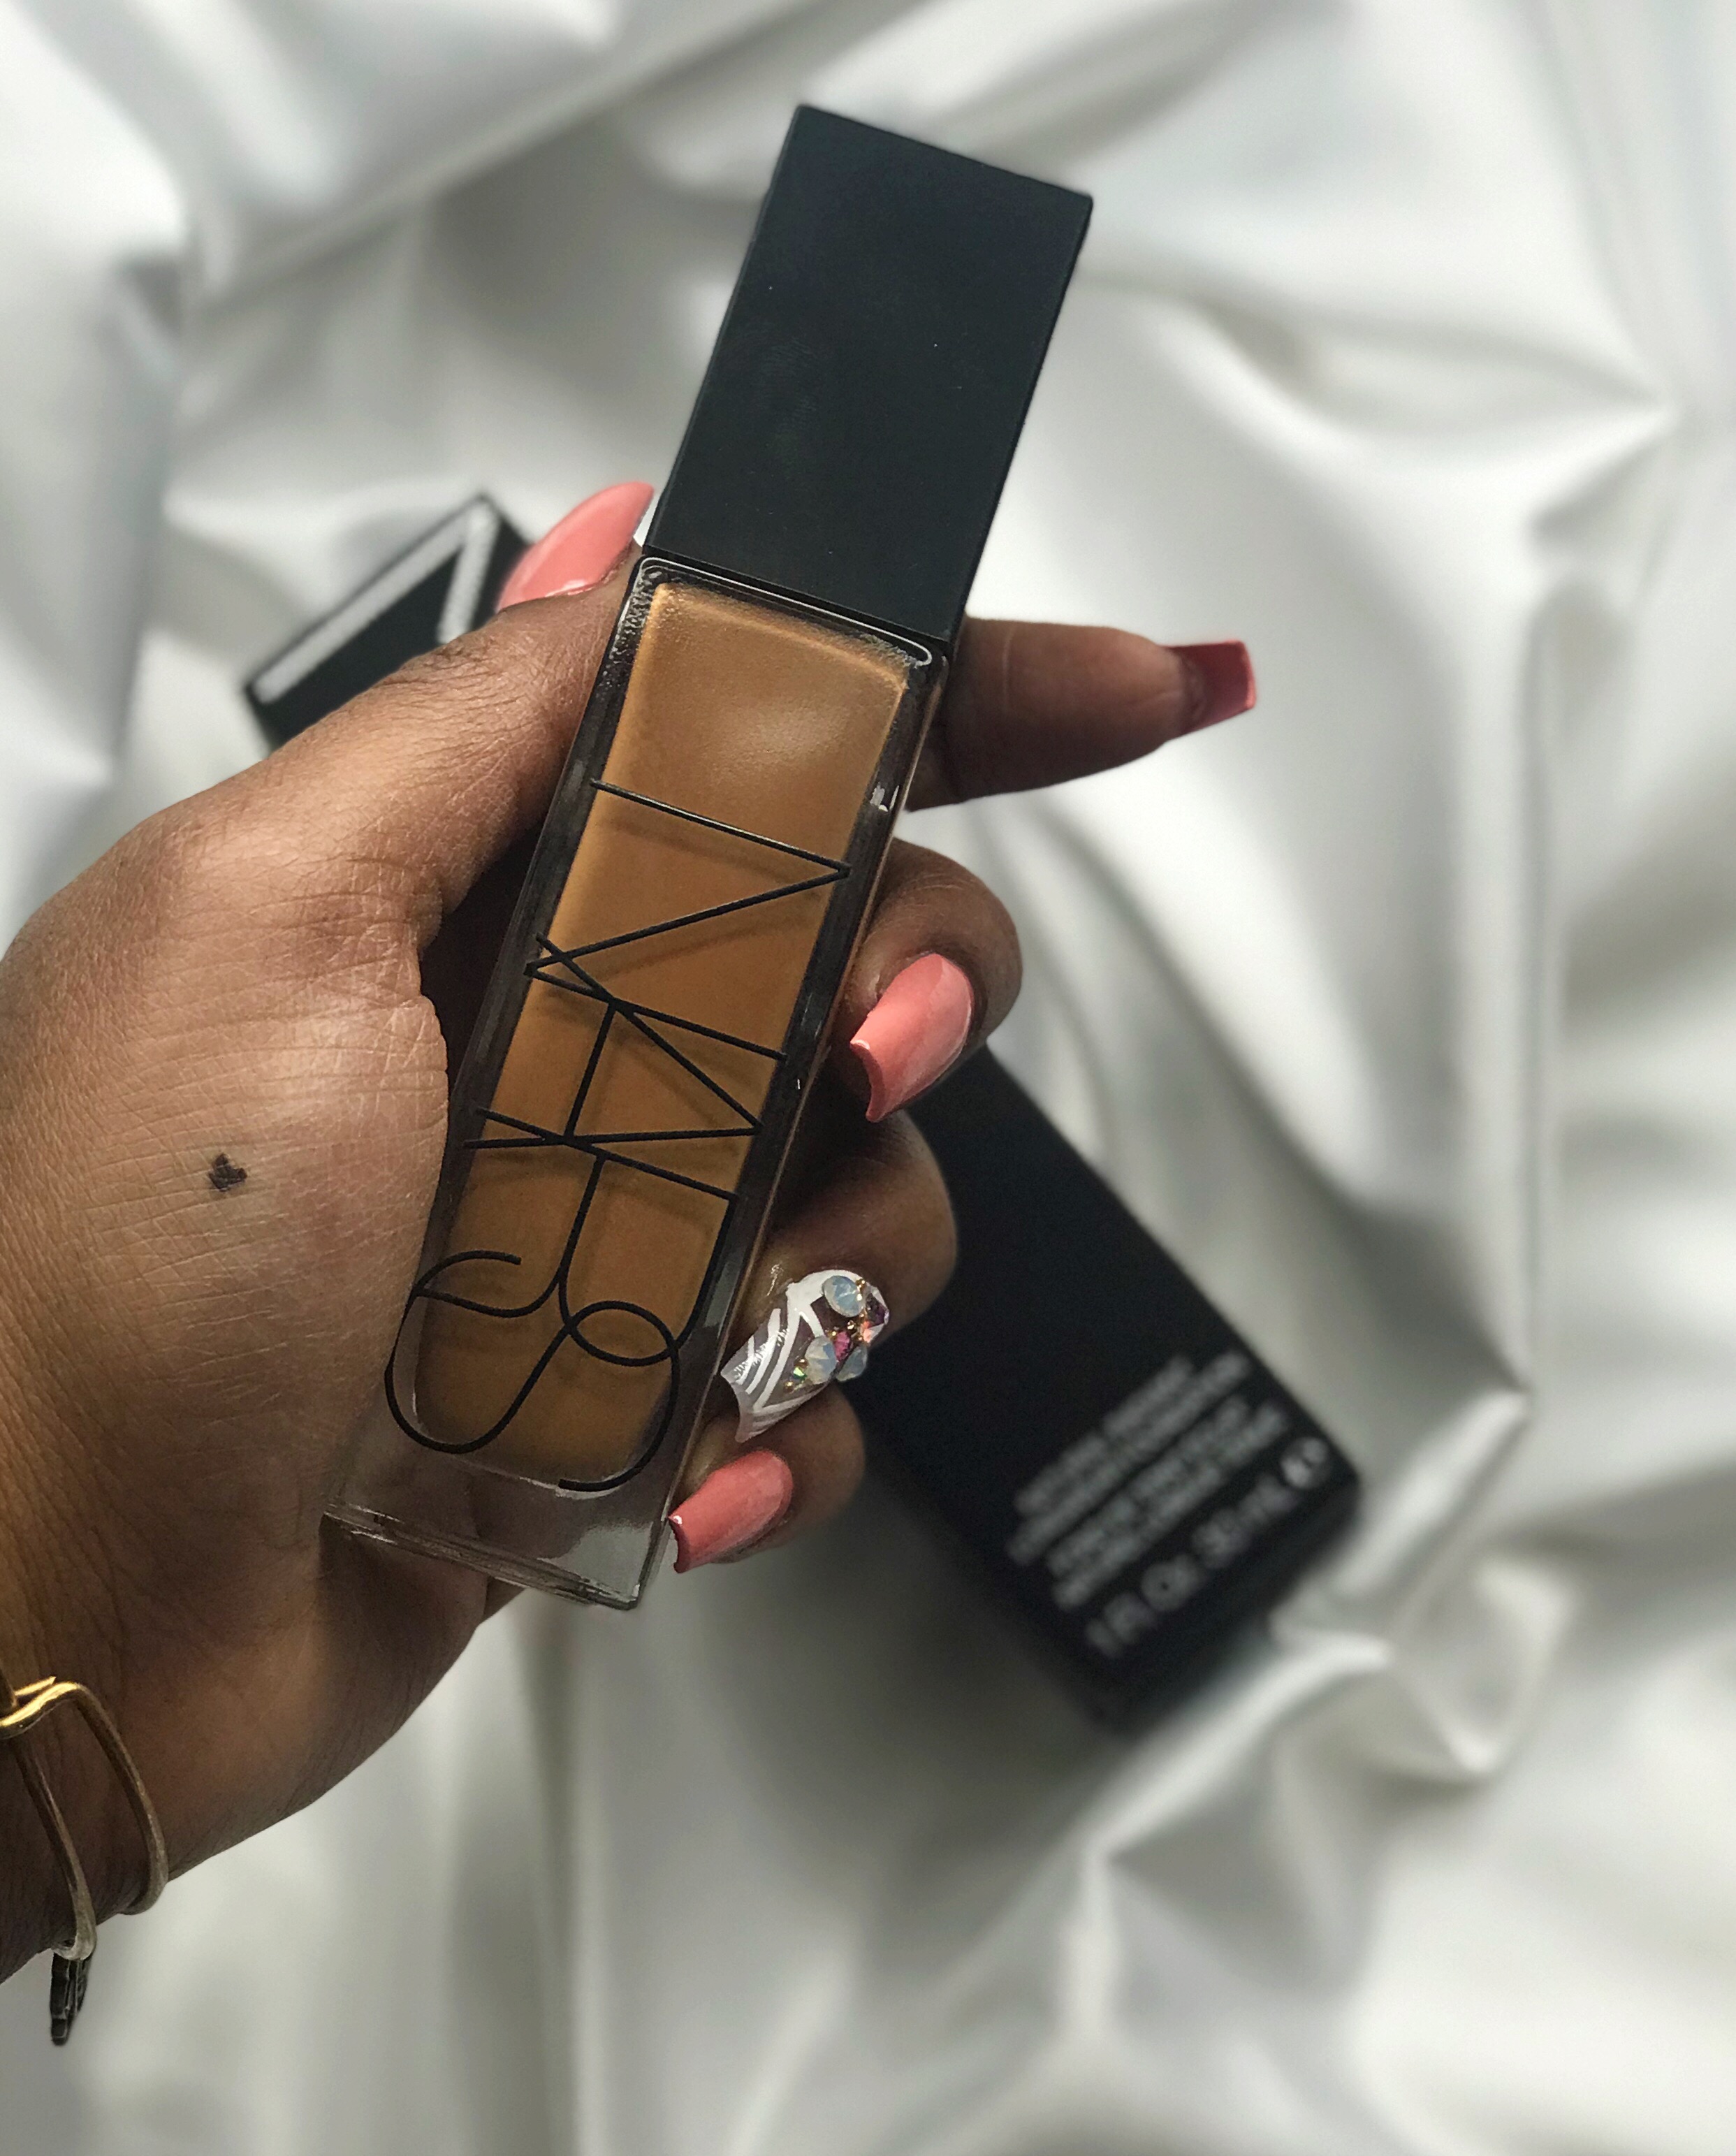 4 Reasons Why You Should Try This New NARS Foundation GoodGirlGoneFab